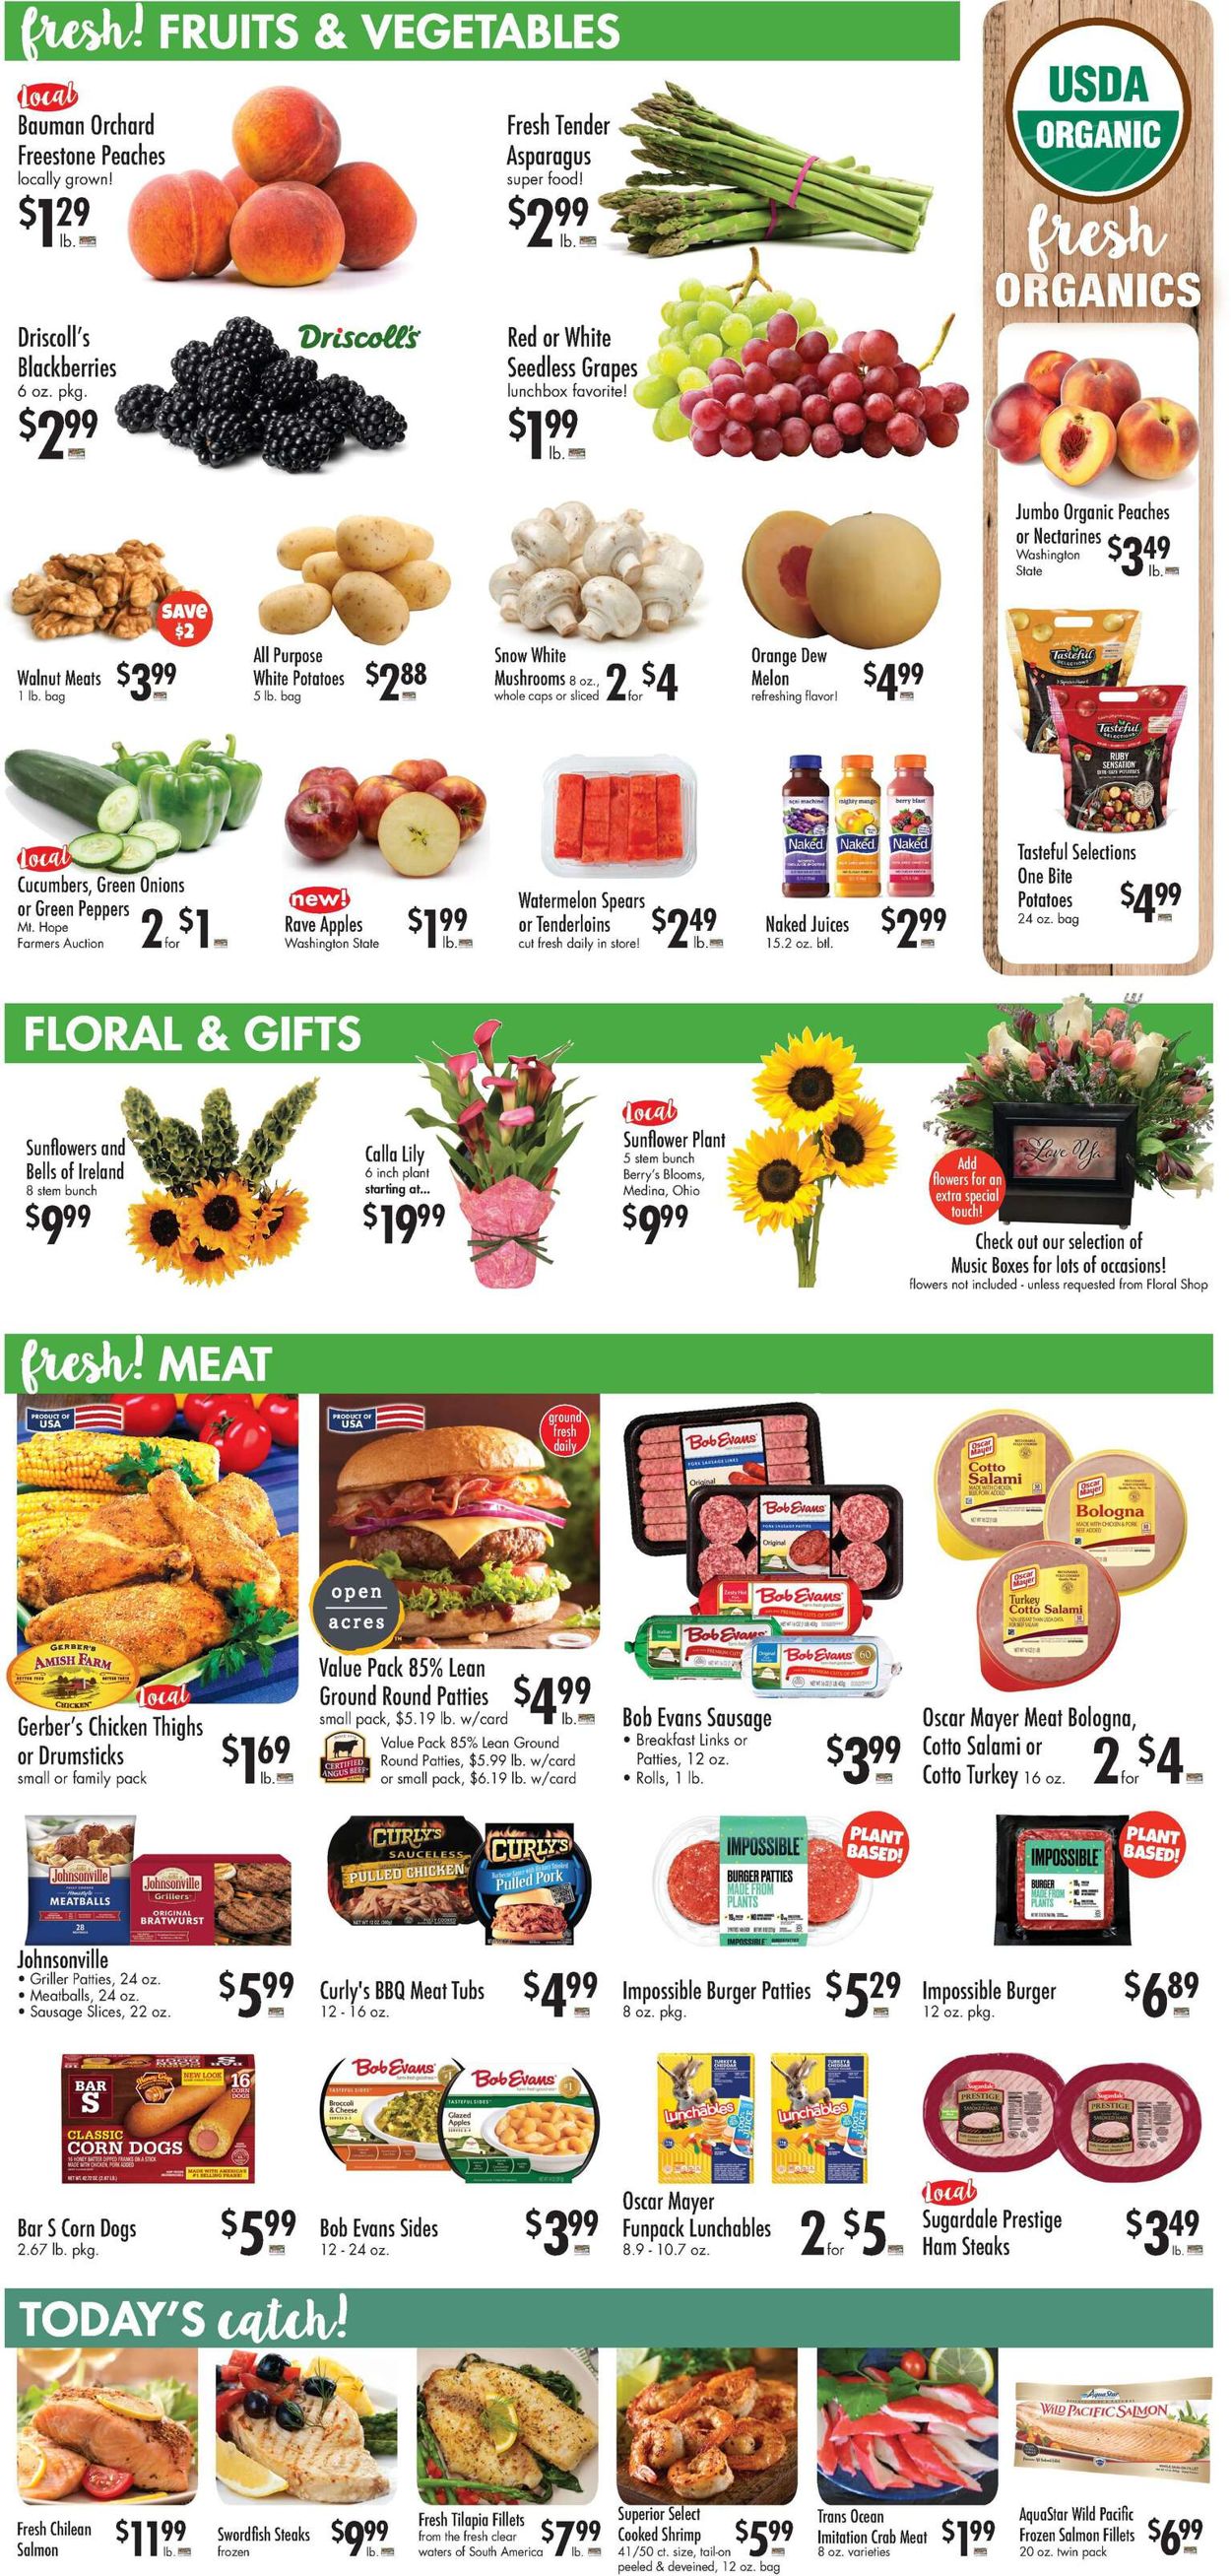 Catalogue Buehler's Fresh Foods from 08/25/2021